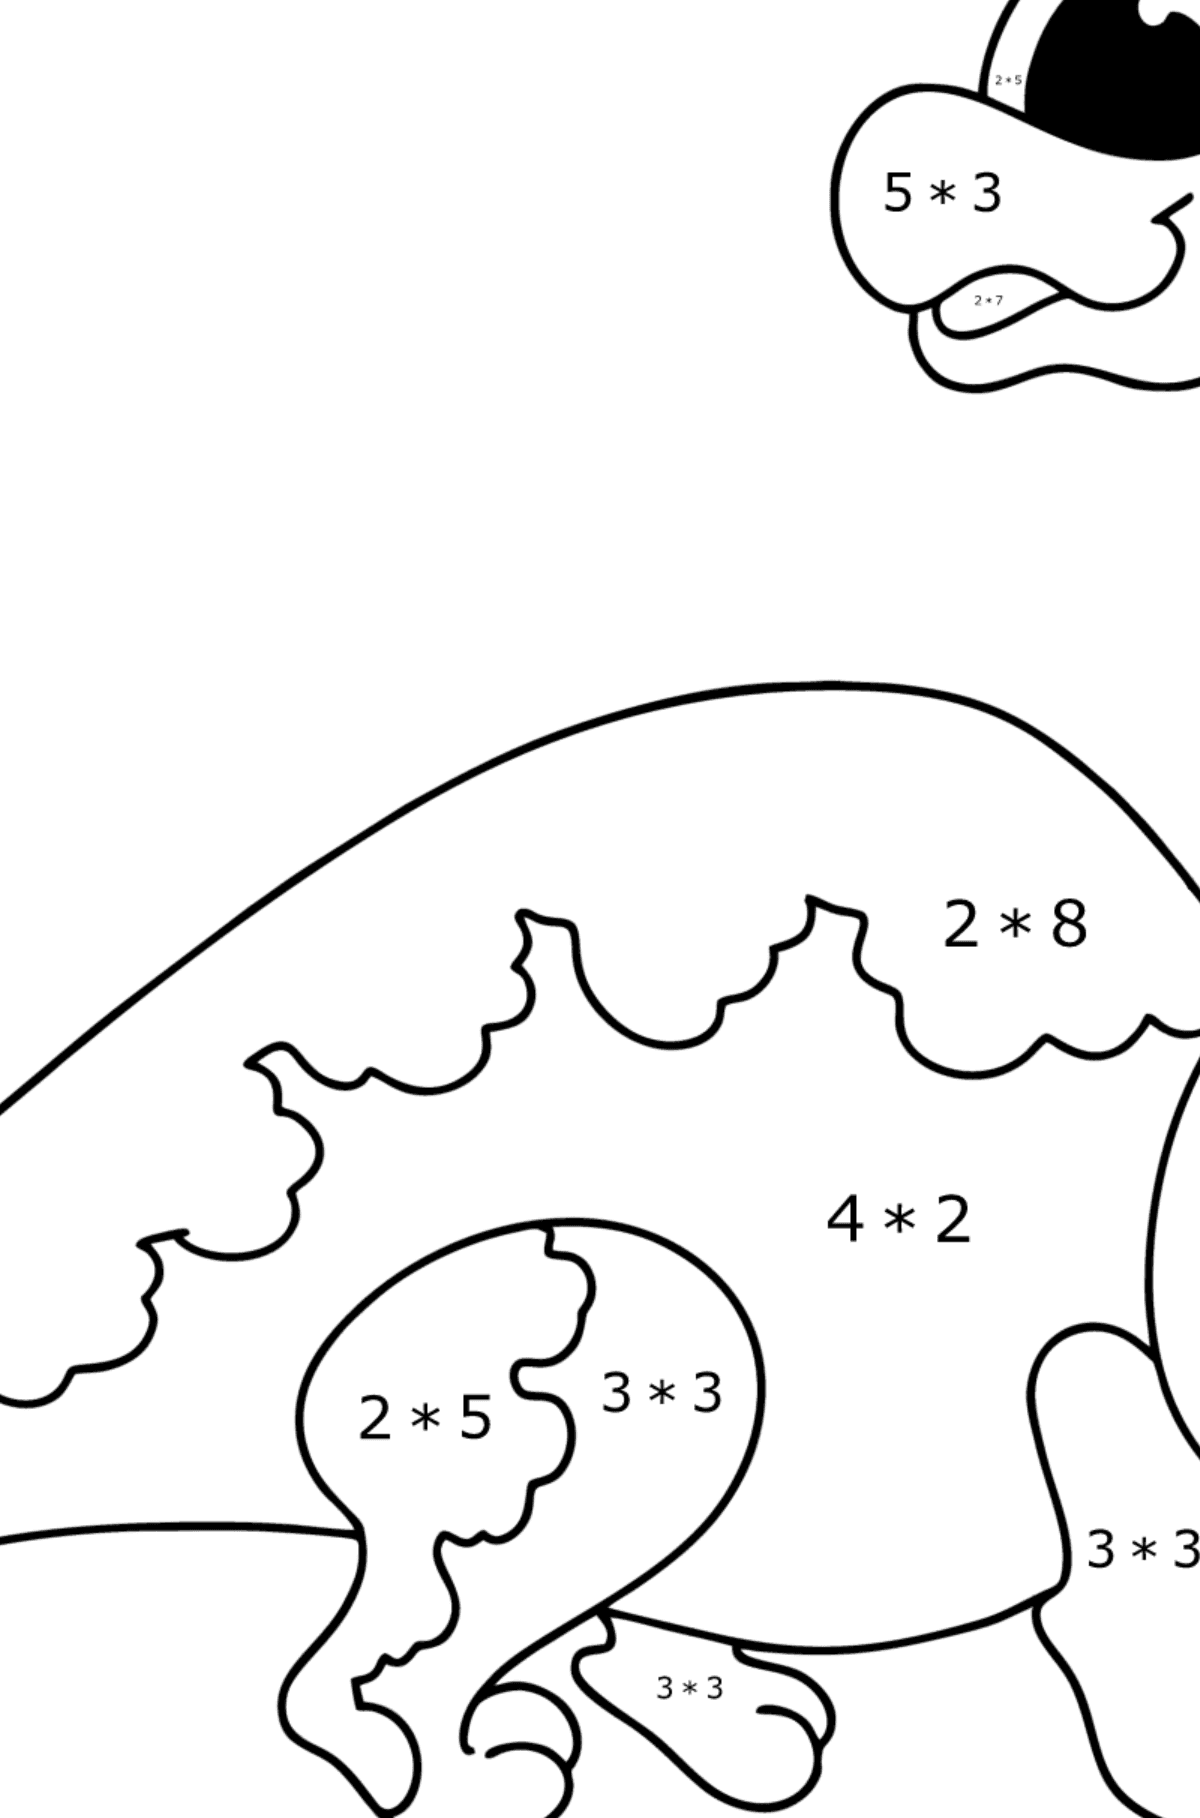 Brachiosaurus coloring page - Math Coloring - Multiplication for Kids